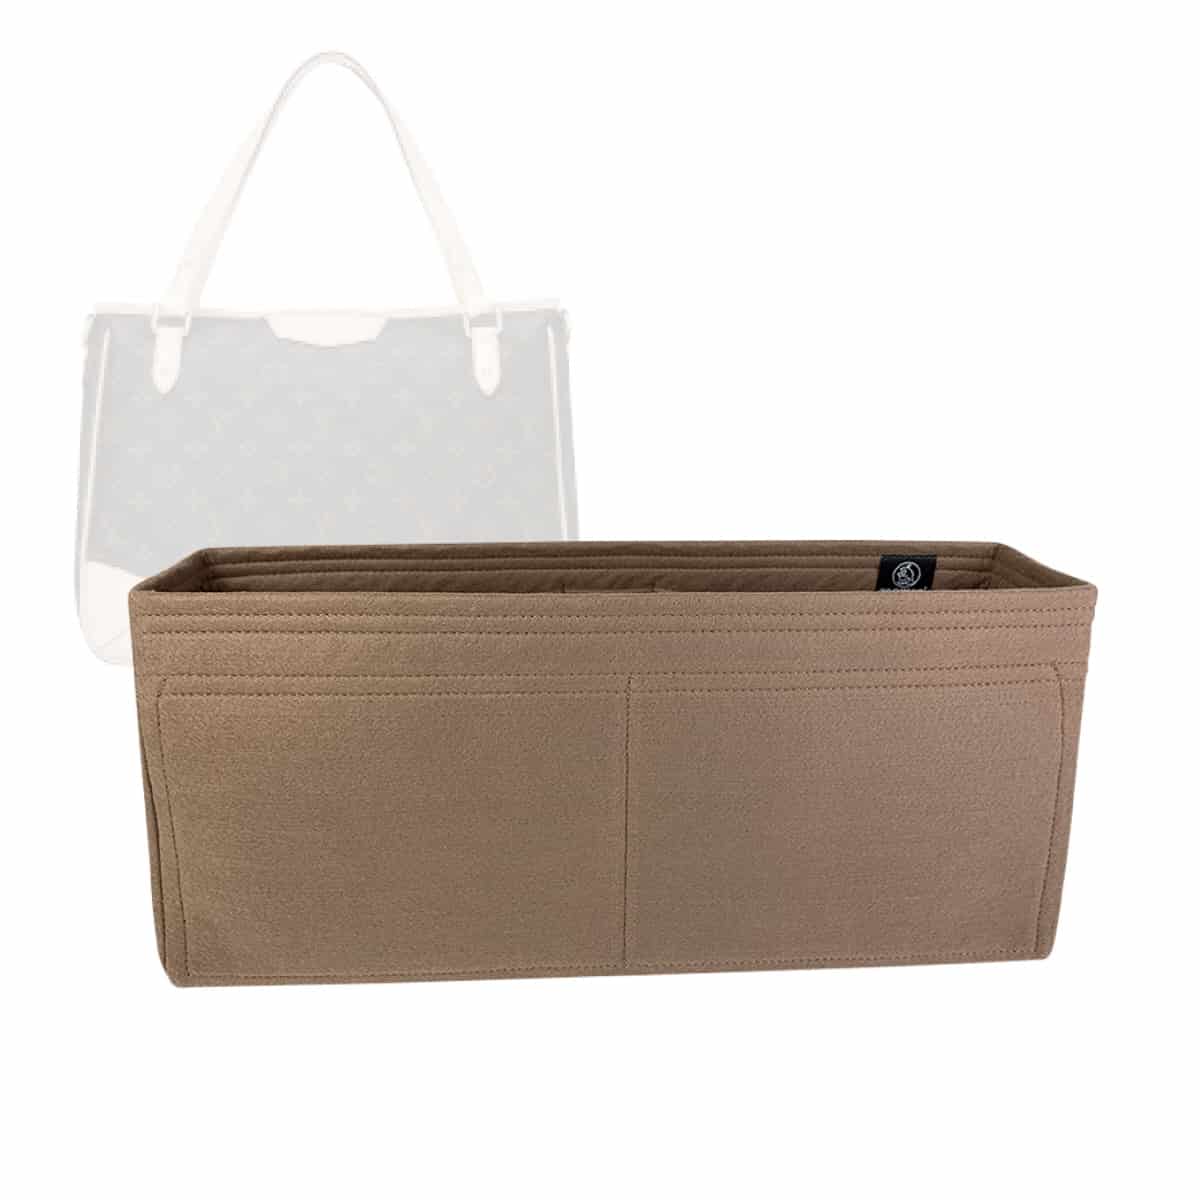 Bag Organizer for Louis Vuitton Odeon Tote mm - 2mm (default)